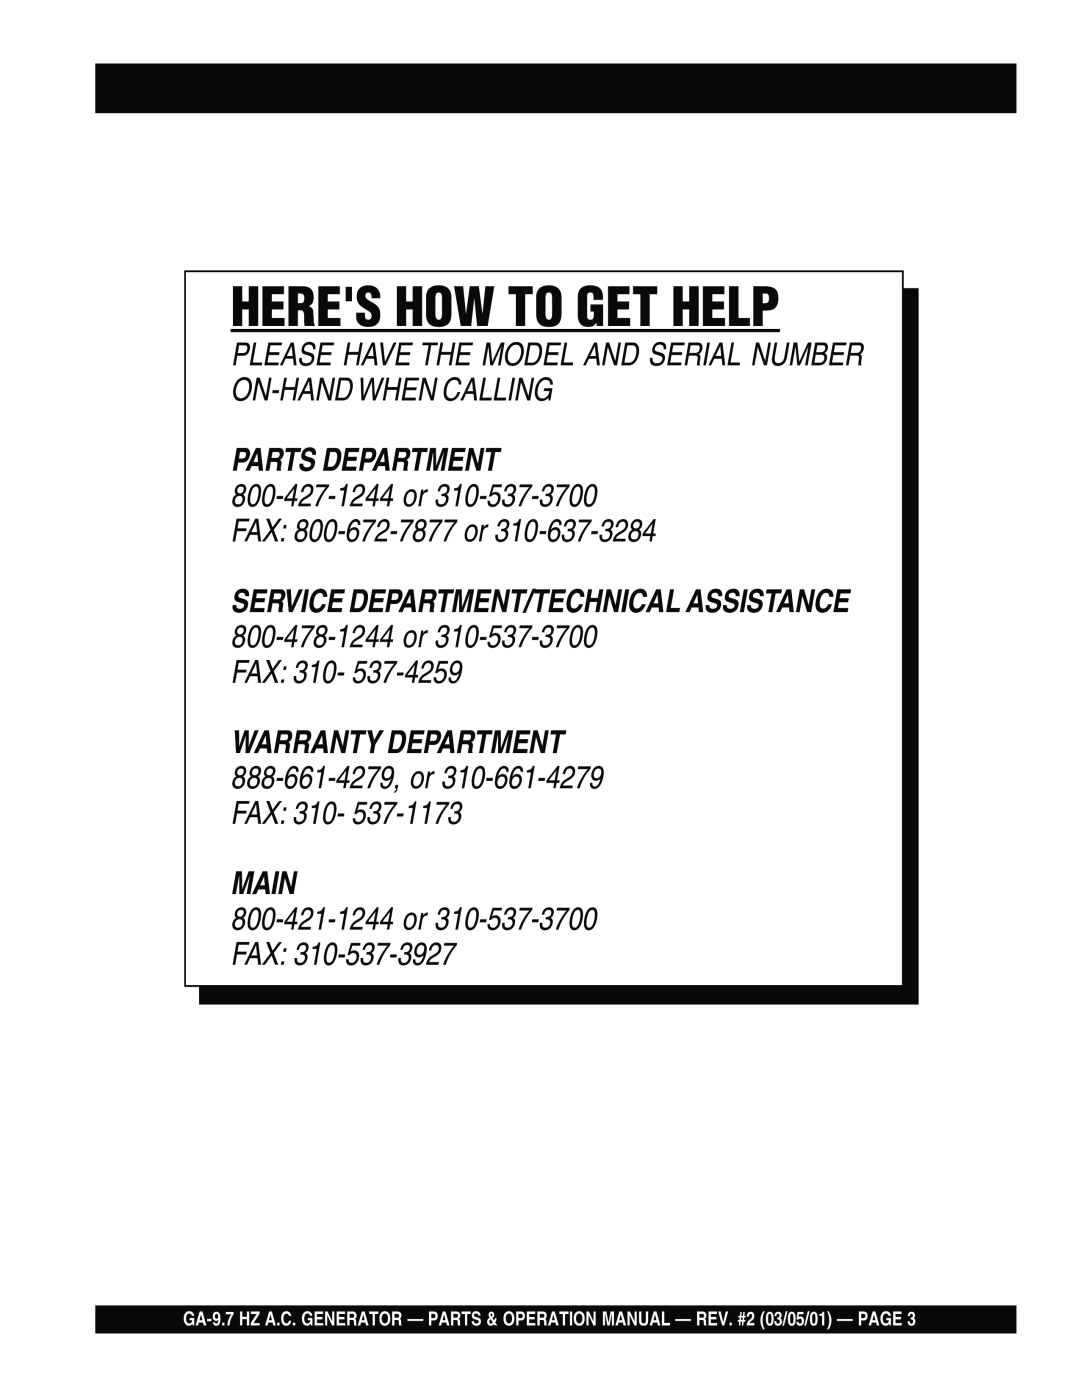 Multiquip GA-9.7 HZ Heres How To Get Help, Parts Department, FAX: 310, Main, 800-421-1244or 310-537-3700FAX 